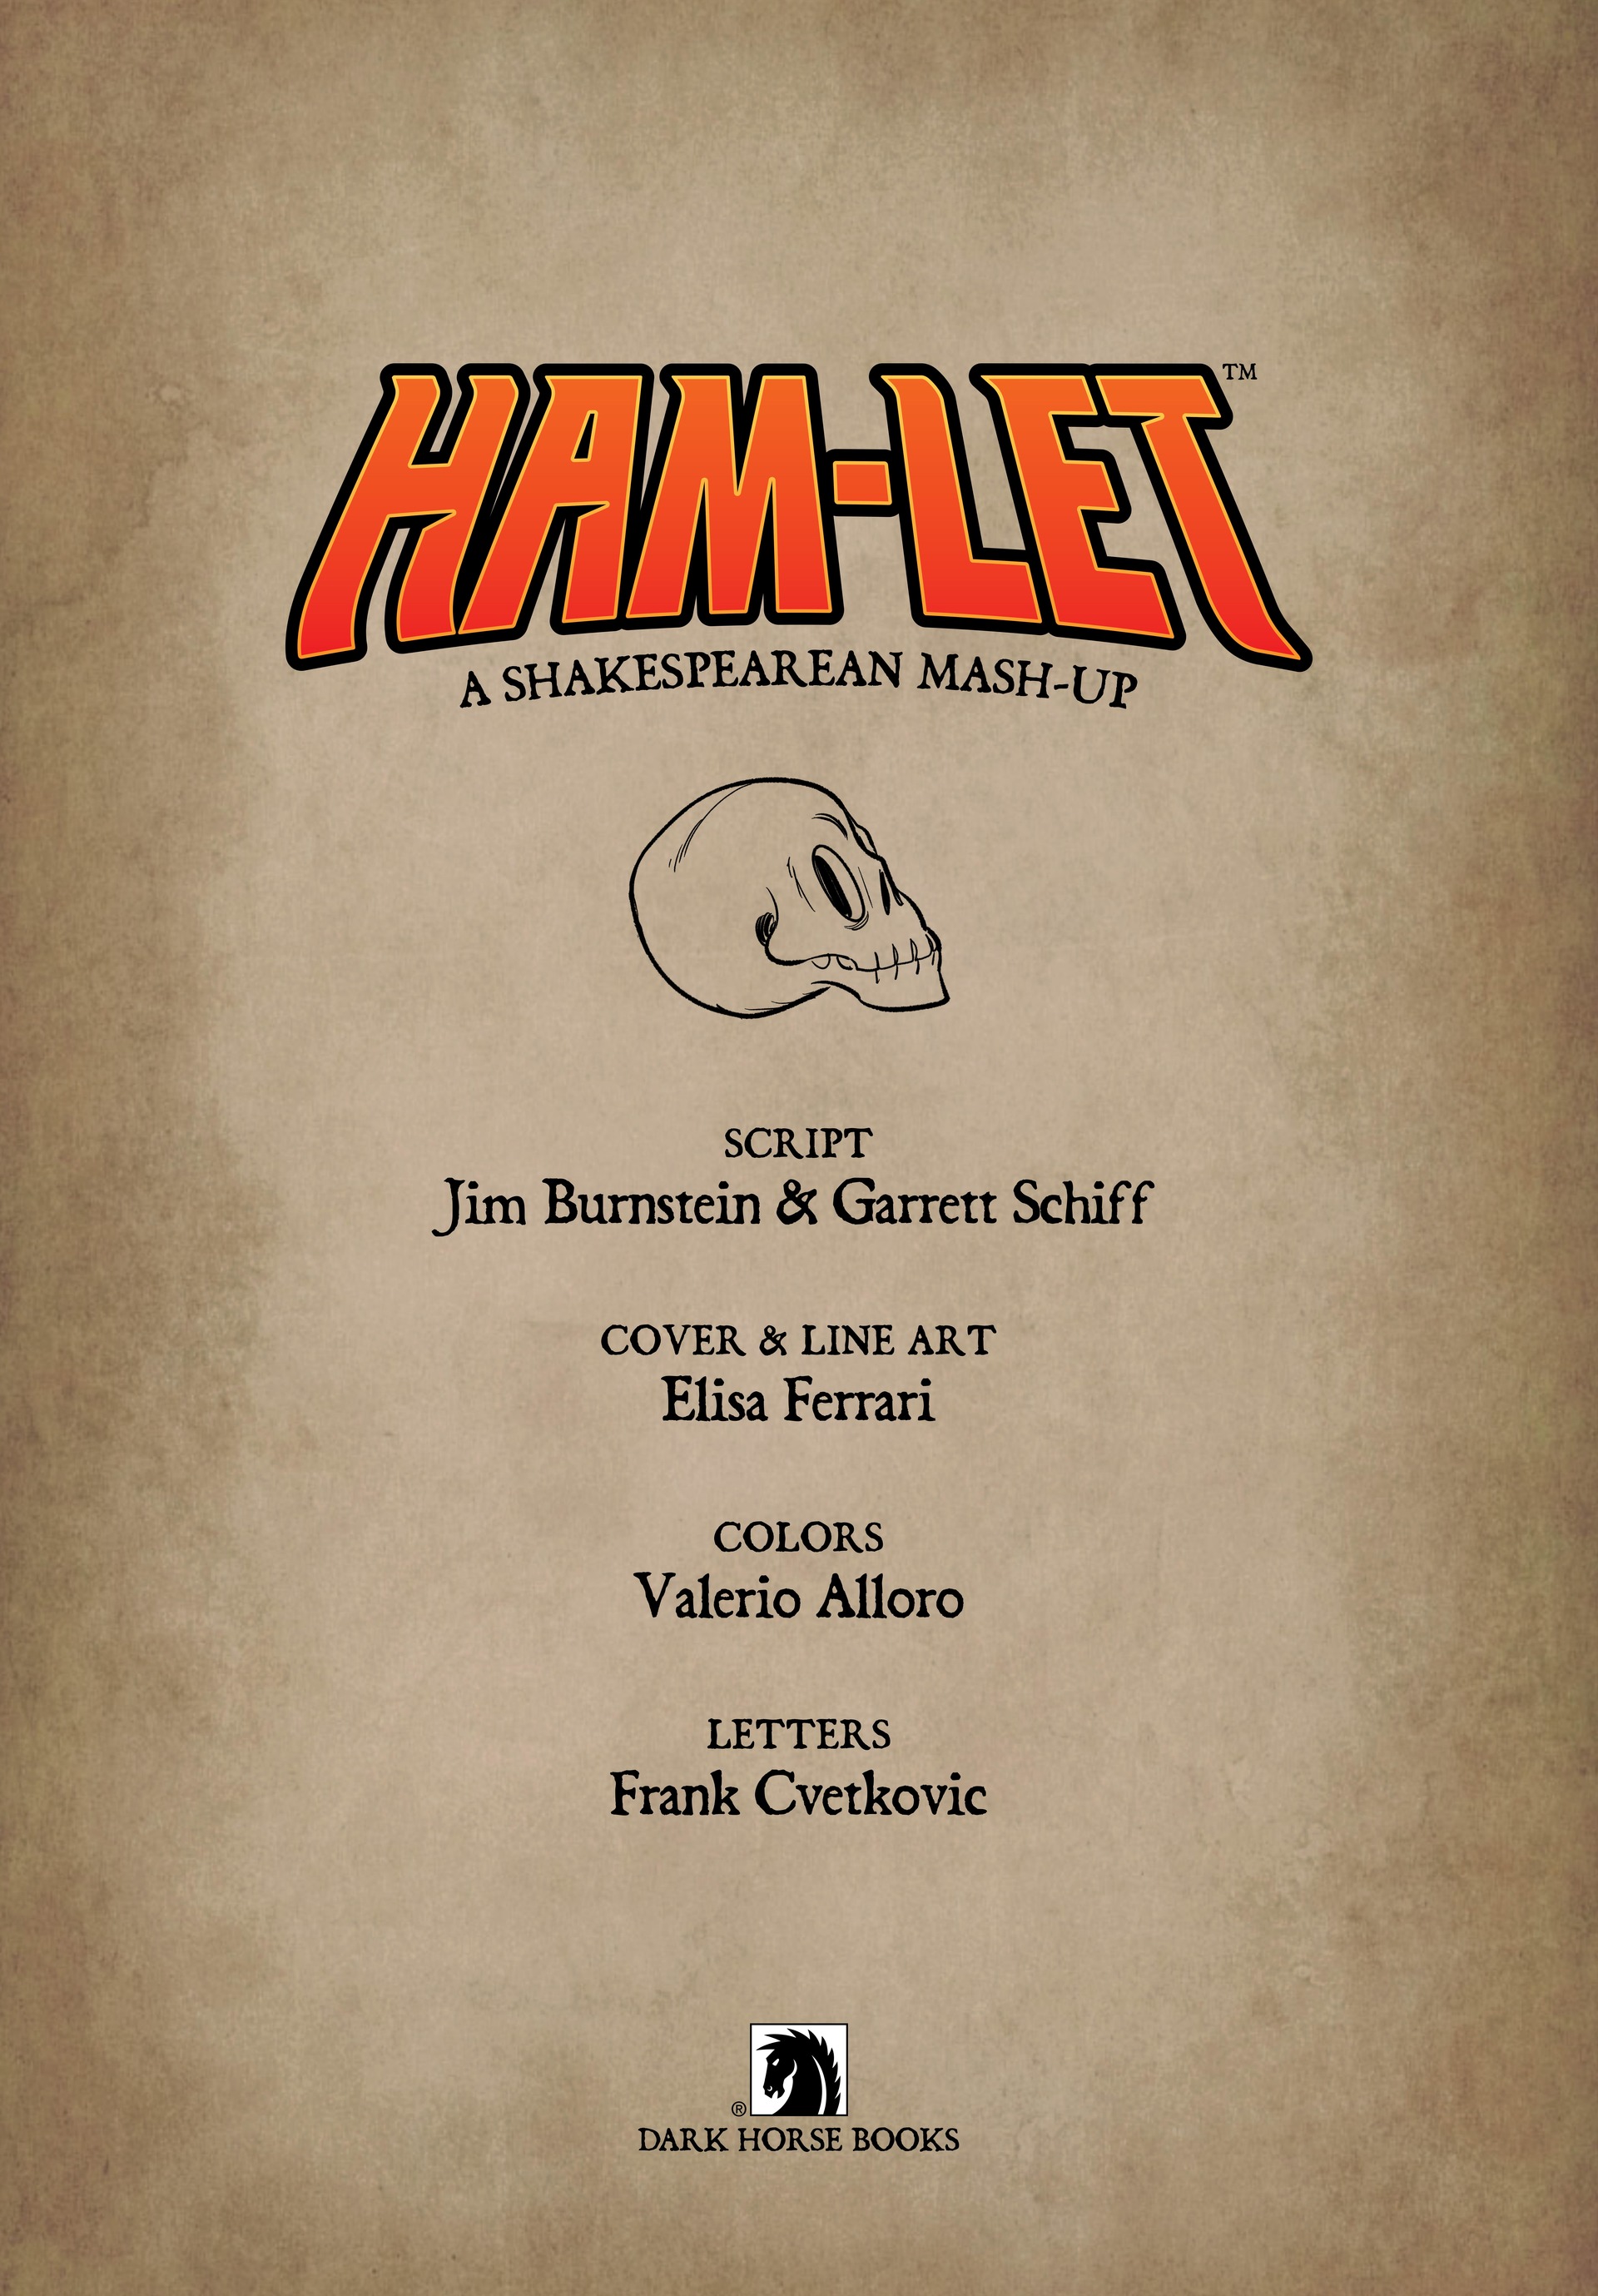 Read online Ham-let: A Shakespearean Mash-up comic -  Issue # Full - 5